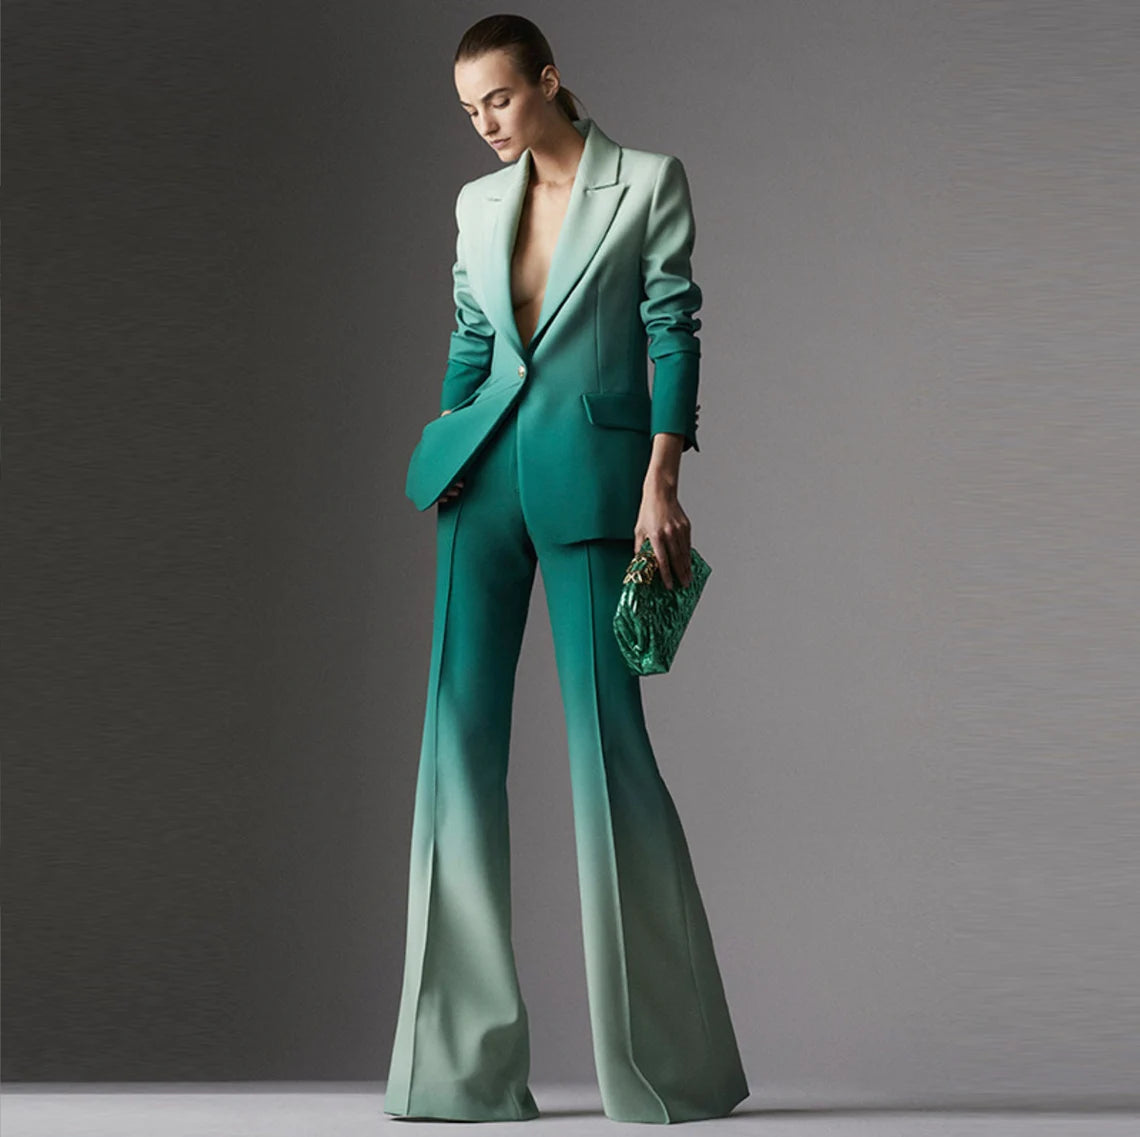 The blazer is the centerpiece of this ensemble, exuding luxury and style. It's meticulously crafted from a rich, emerald green fabric that seamlessly transitions into a subtle gradient, fading into a slightly lighter shade towards the bottom. The luxurious material drapes elegantly, giving the blazer a fluid and sophisticated appearance. The tailored fit ensures it flatters your figure, with structured shoulders and a cinched waist to accentuate your curves.